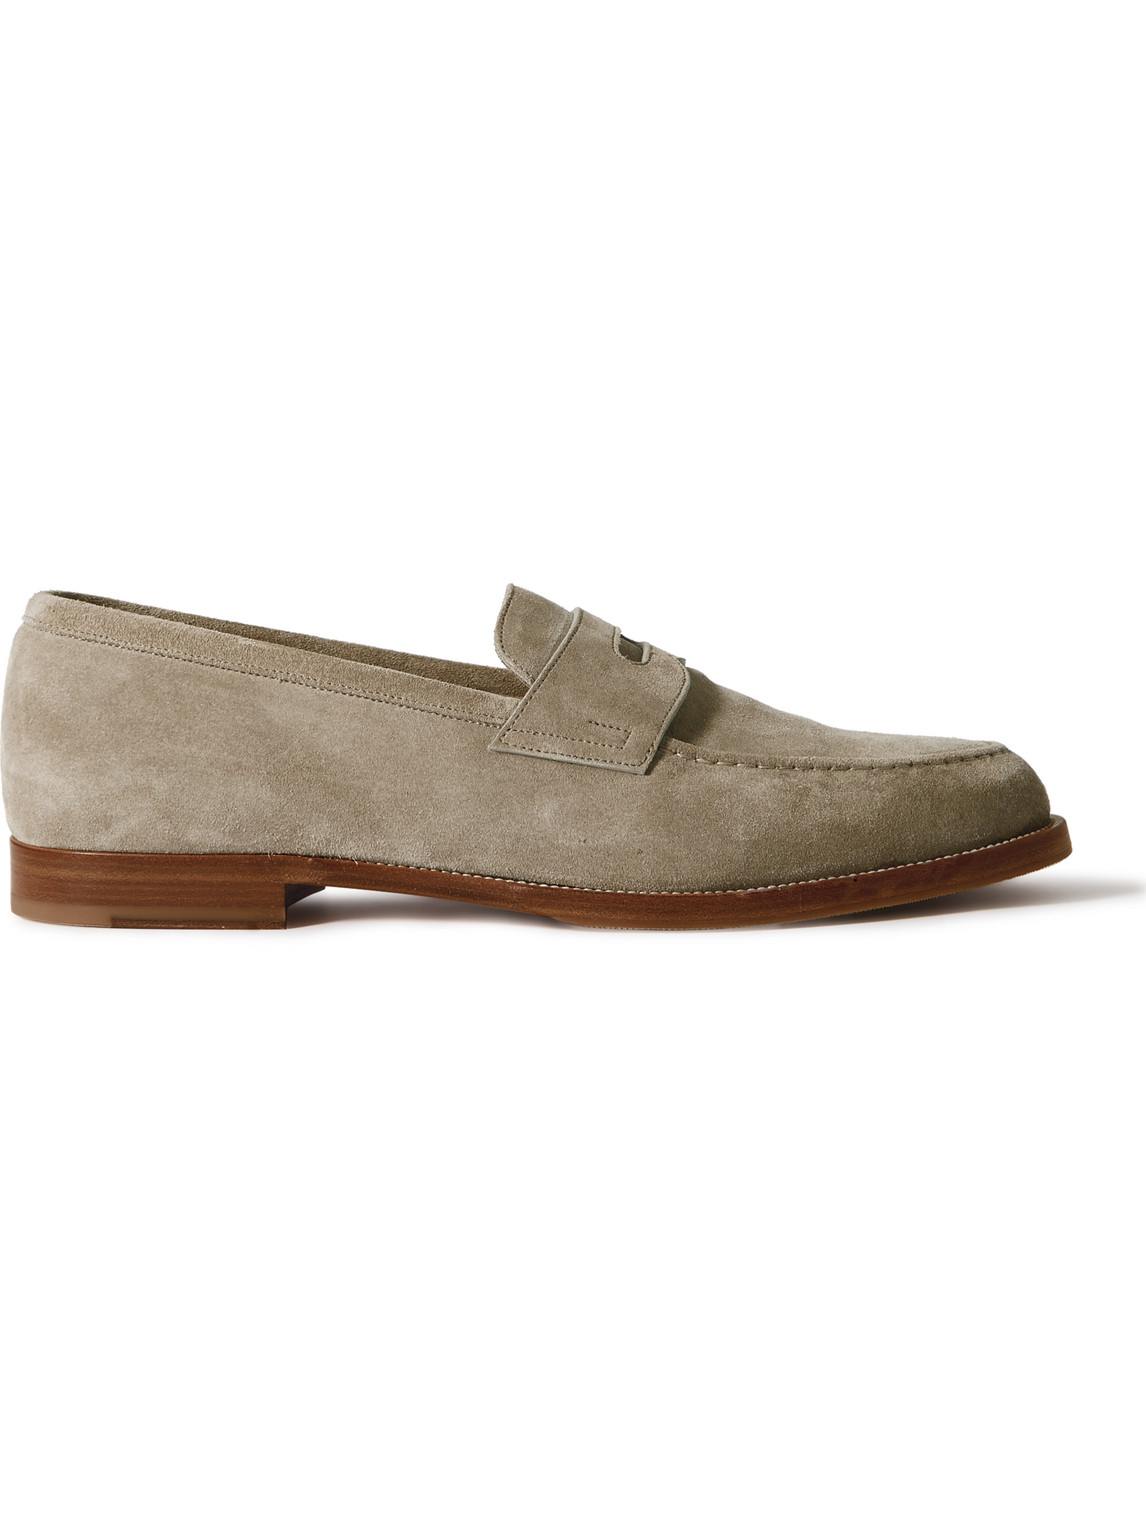 DUNHILL AUDLEY SUEDE PENNY LOAFERS